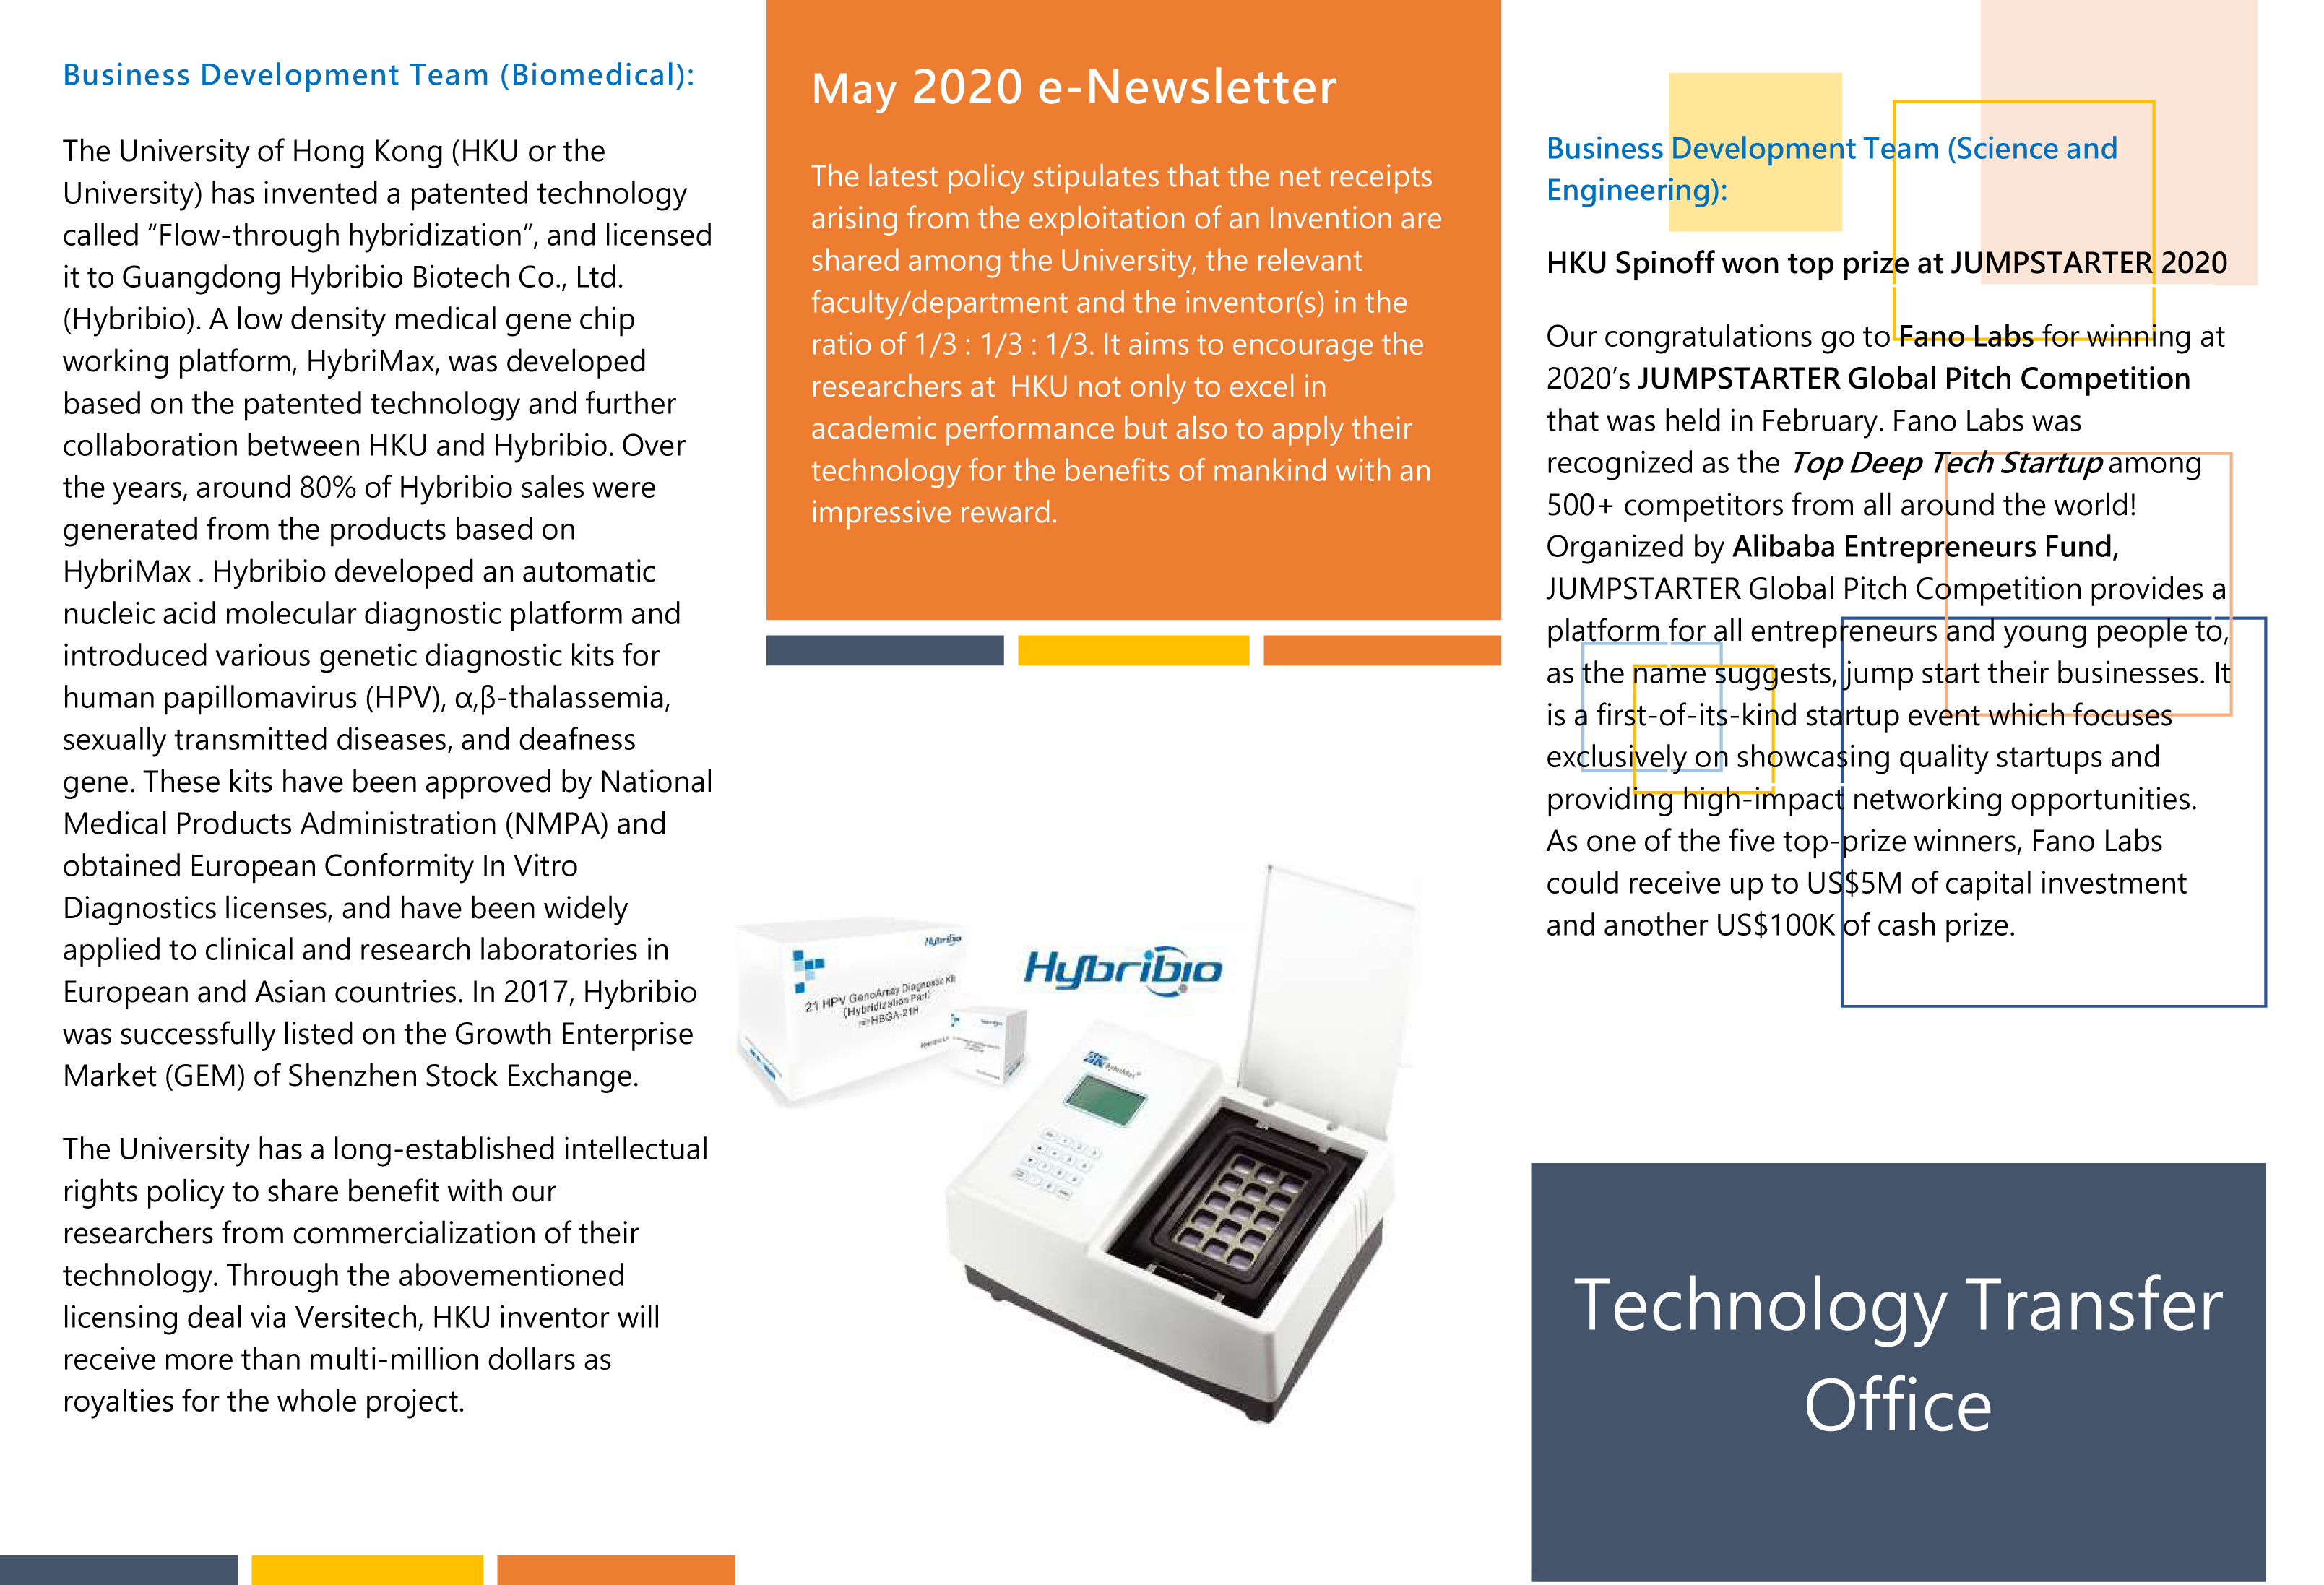 TTO e-Newsletter May 2020-page 1